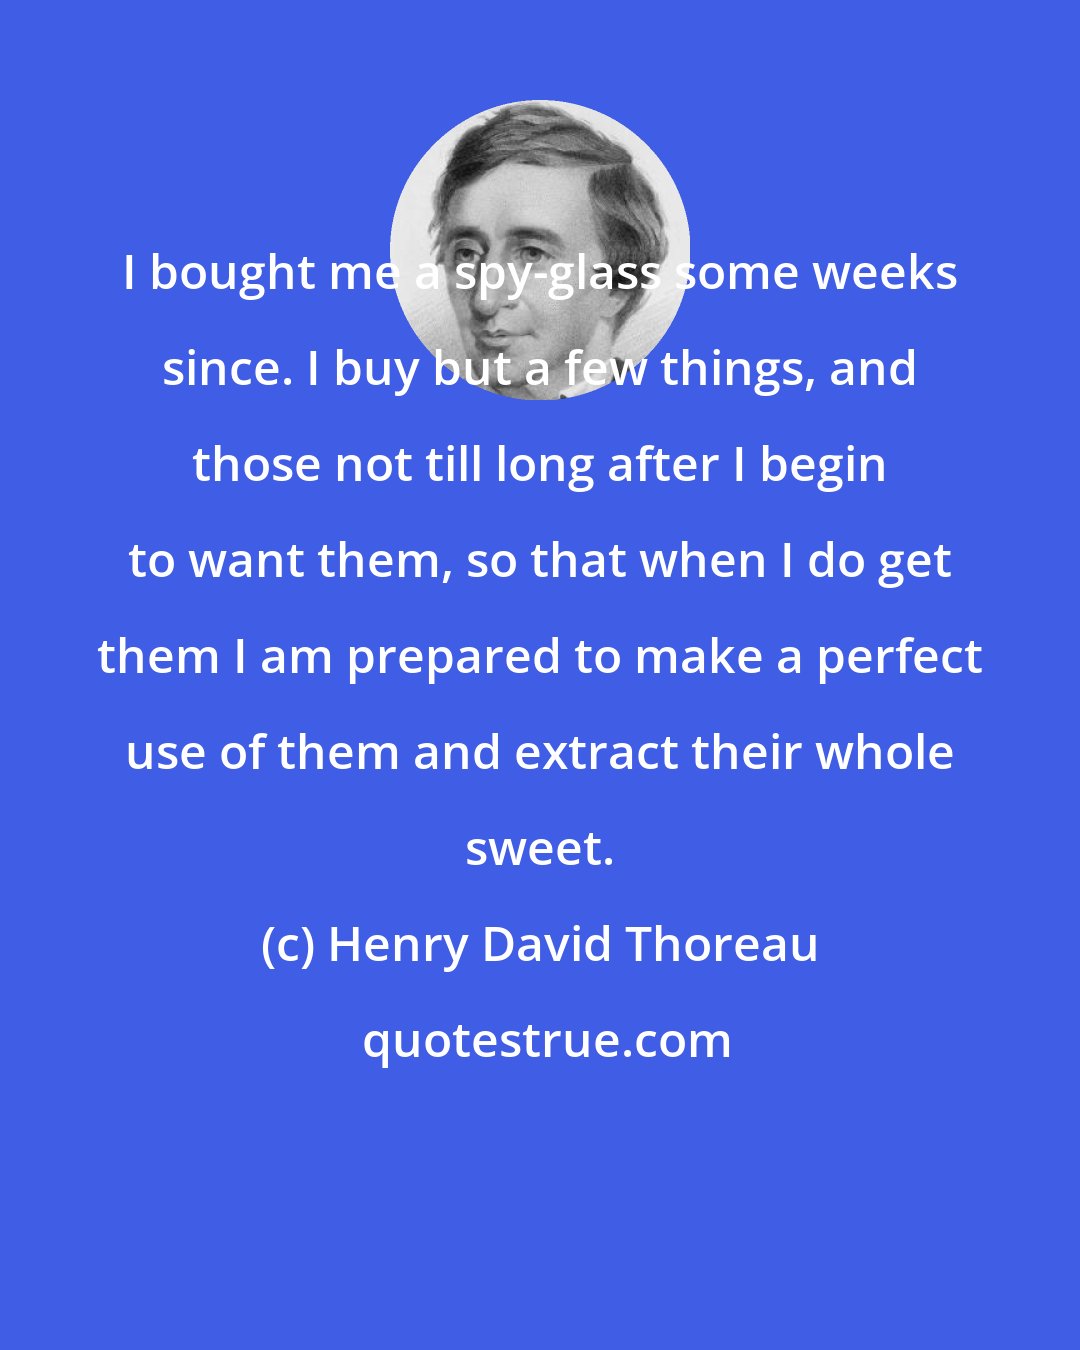 Henry David Thoreau: I bought me a spy-glass some weeks since. I buy but a few things, and those not till long after I begin to want them, so that when I do get them I am prepared to make a perfect use of them and extract their whole sweet.